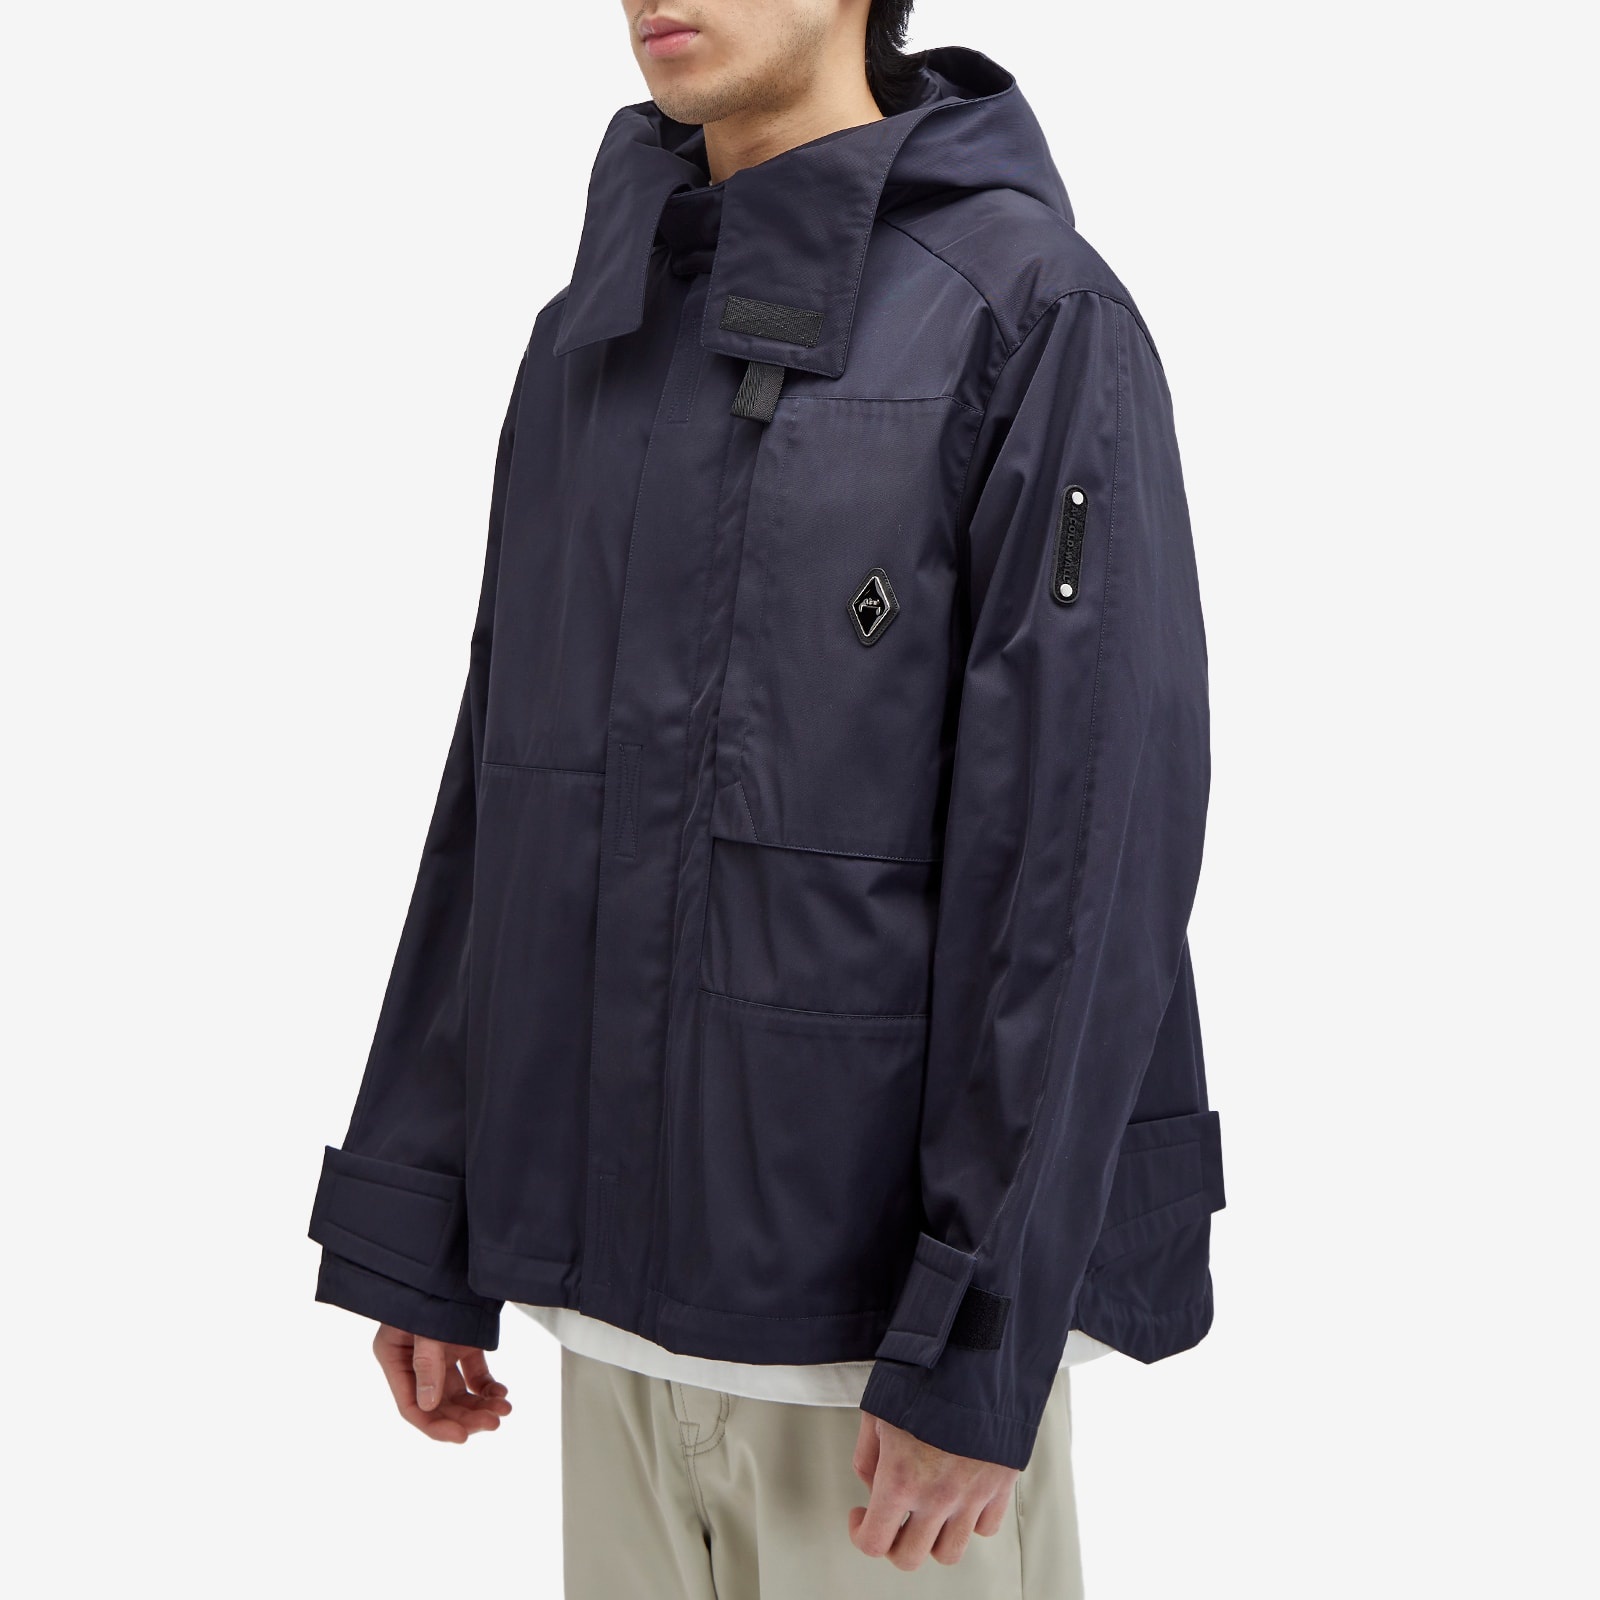 A-COLD-WALL* Gable Storm Jacket - 2